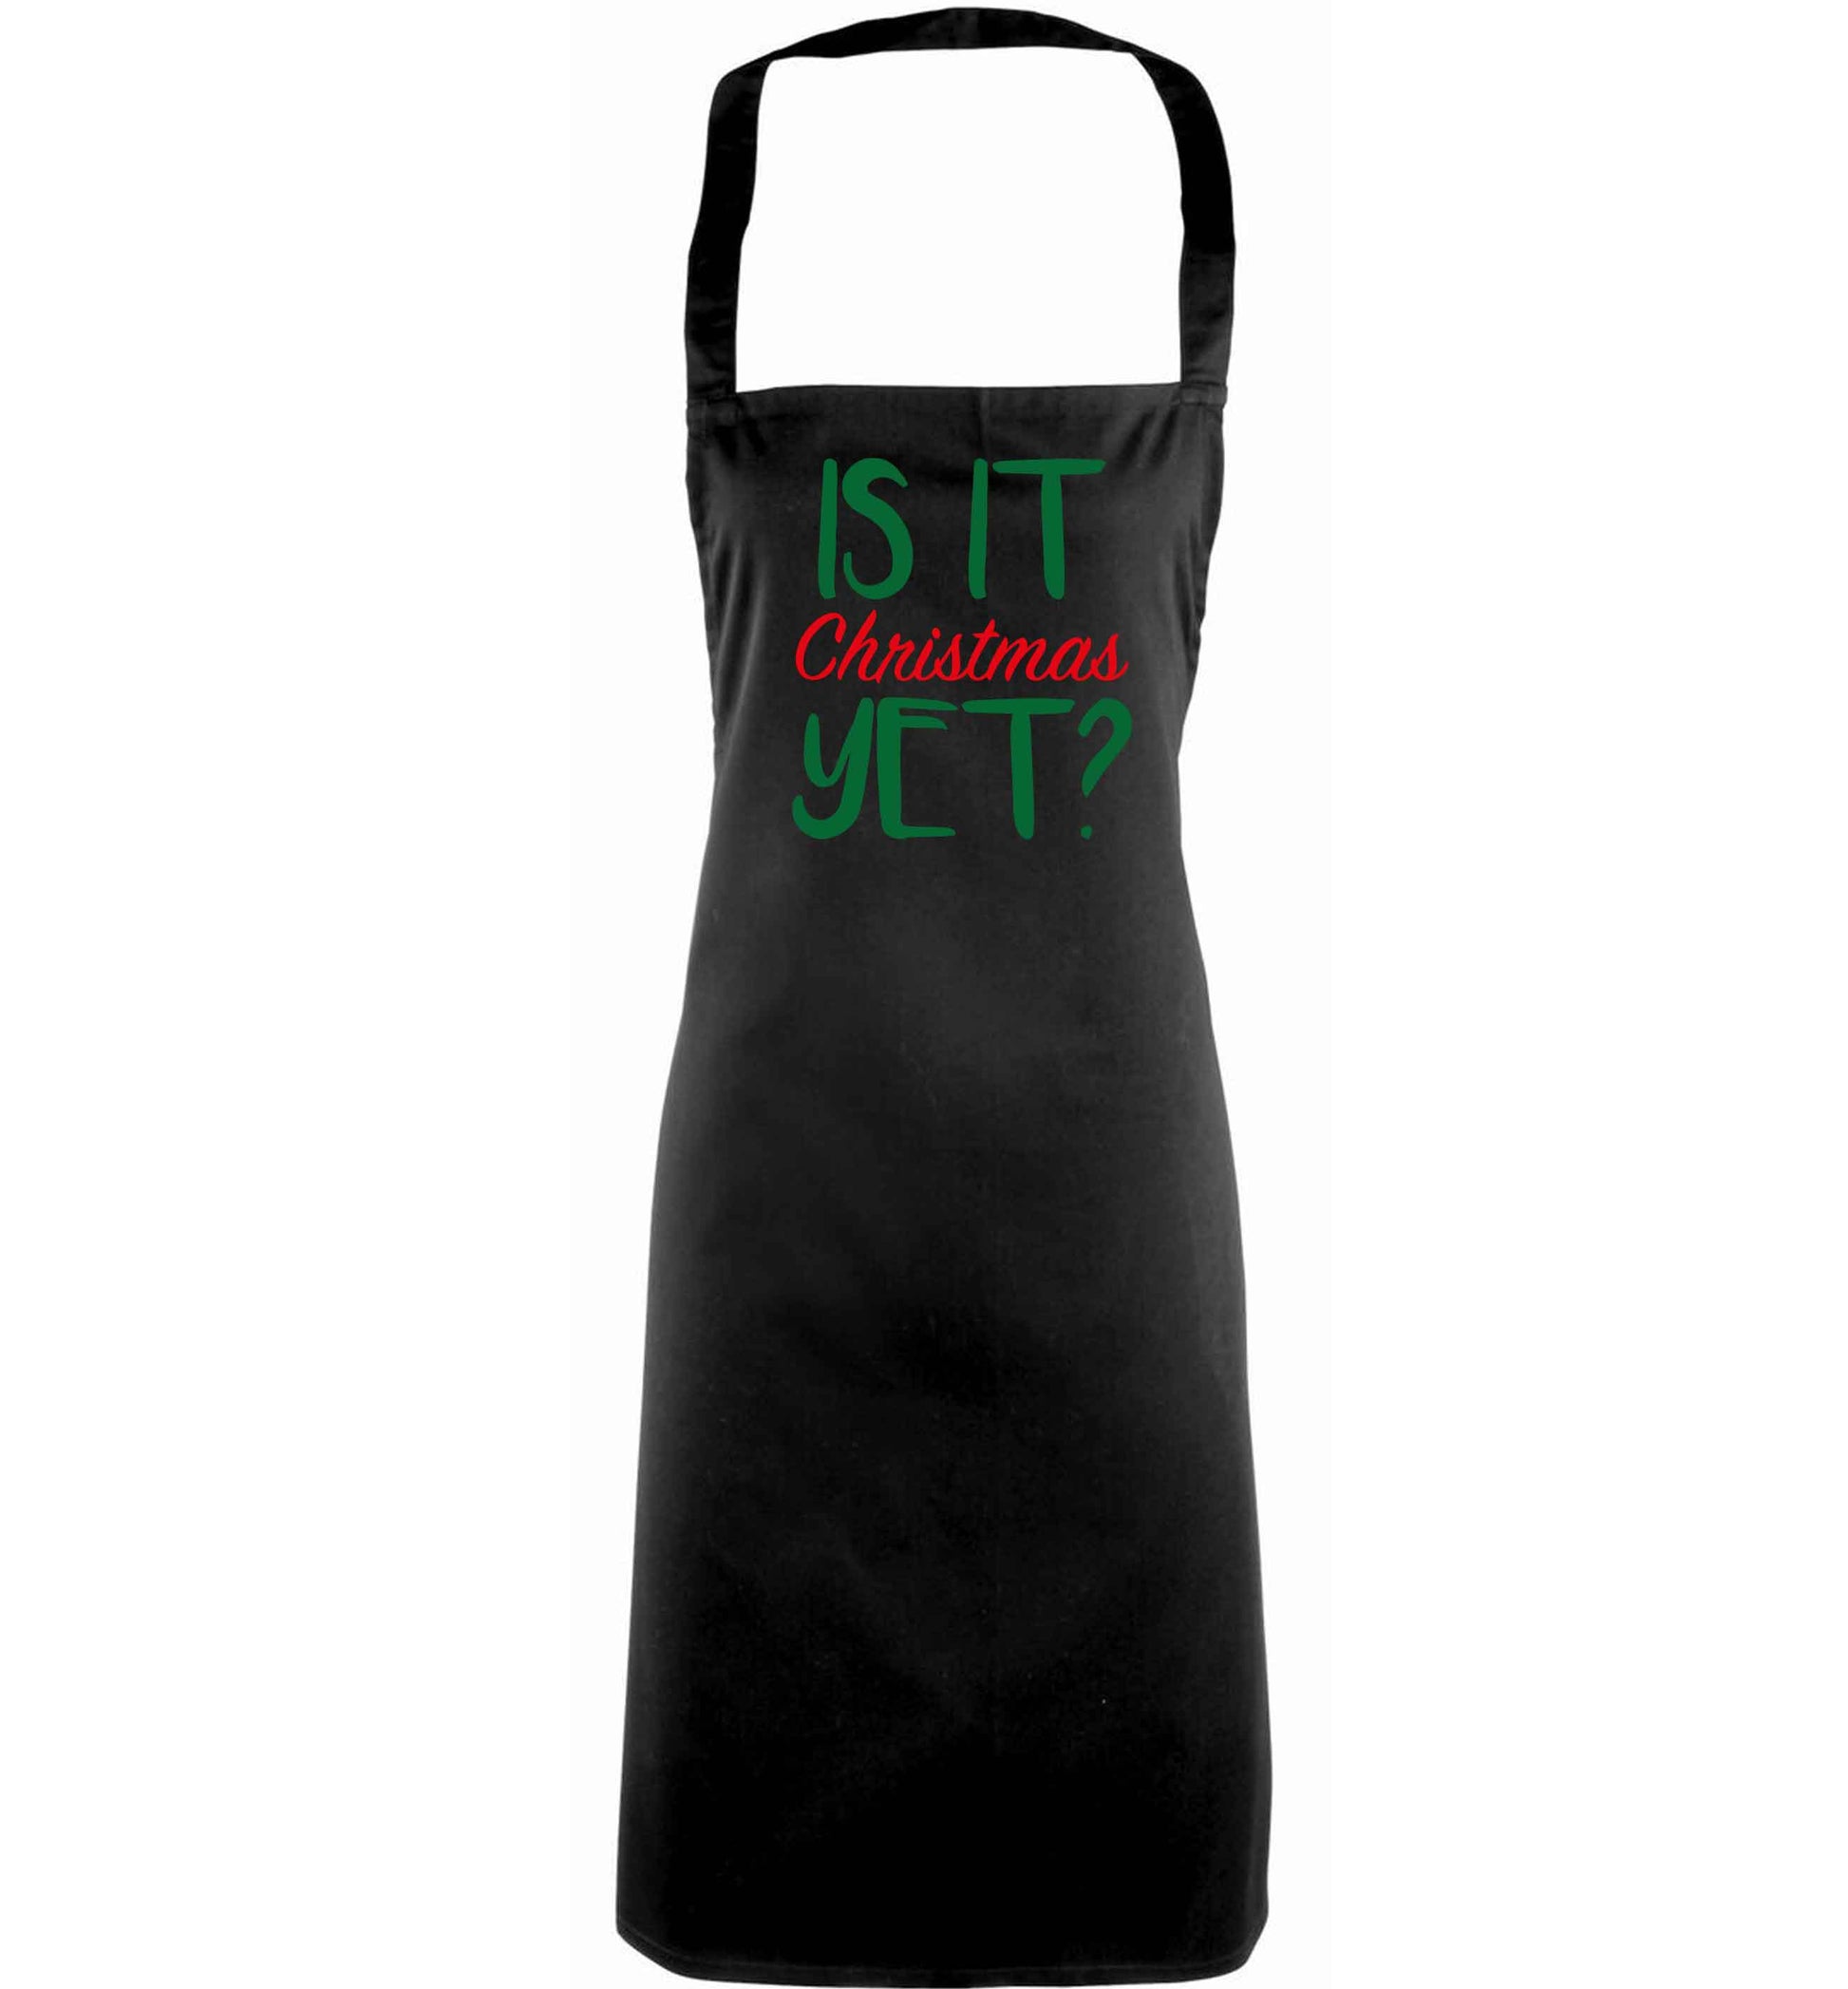 Is it Christmas yet? adults black apron